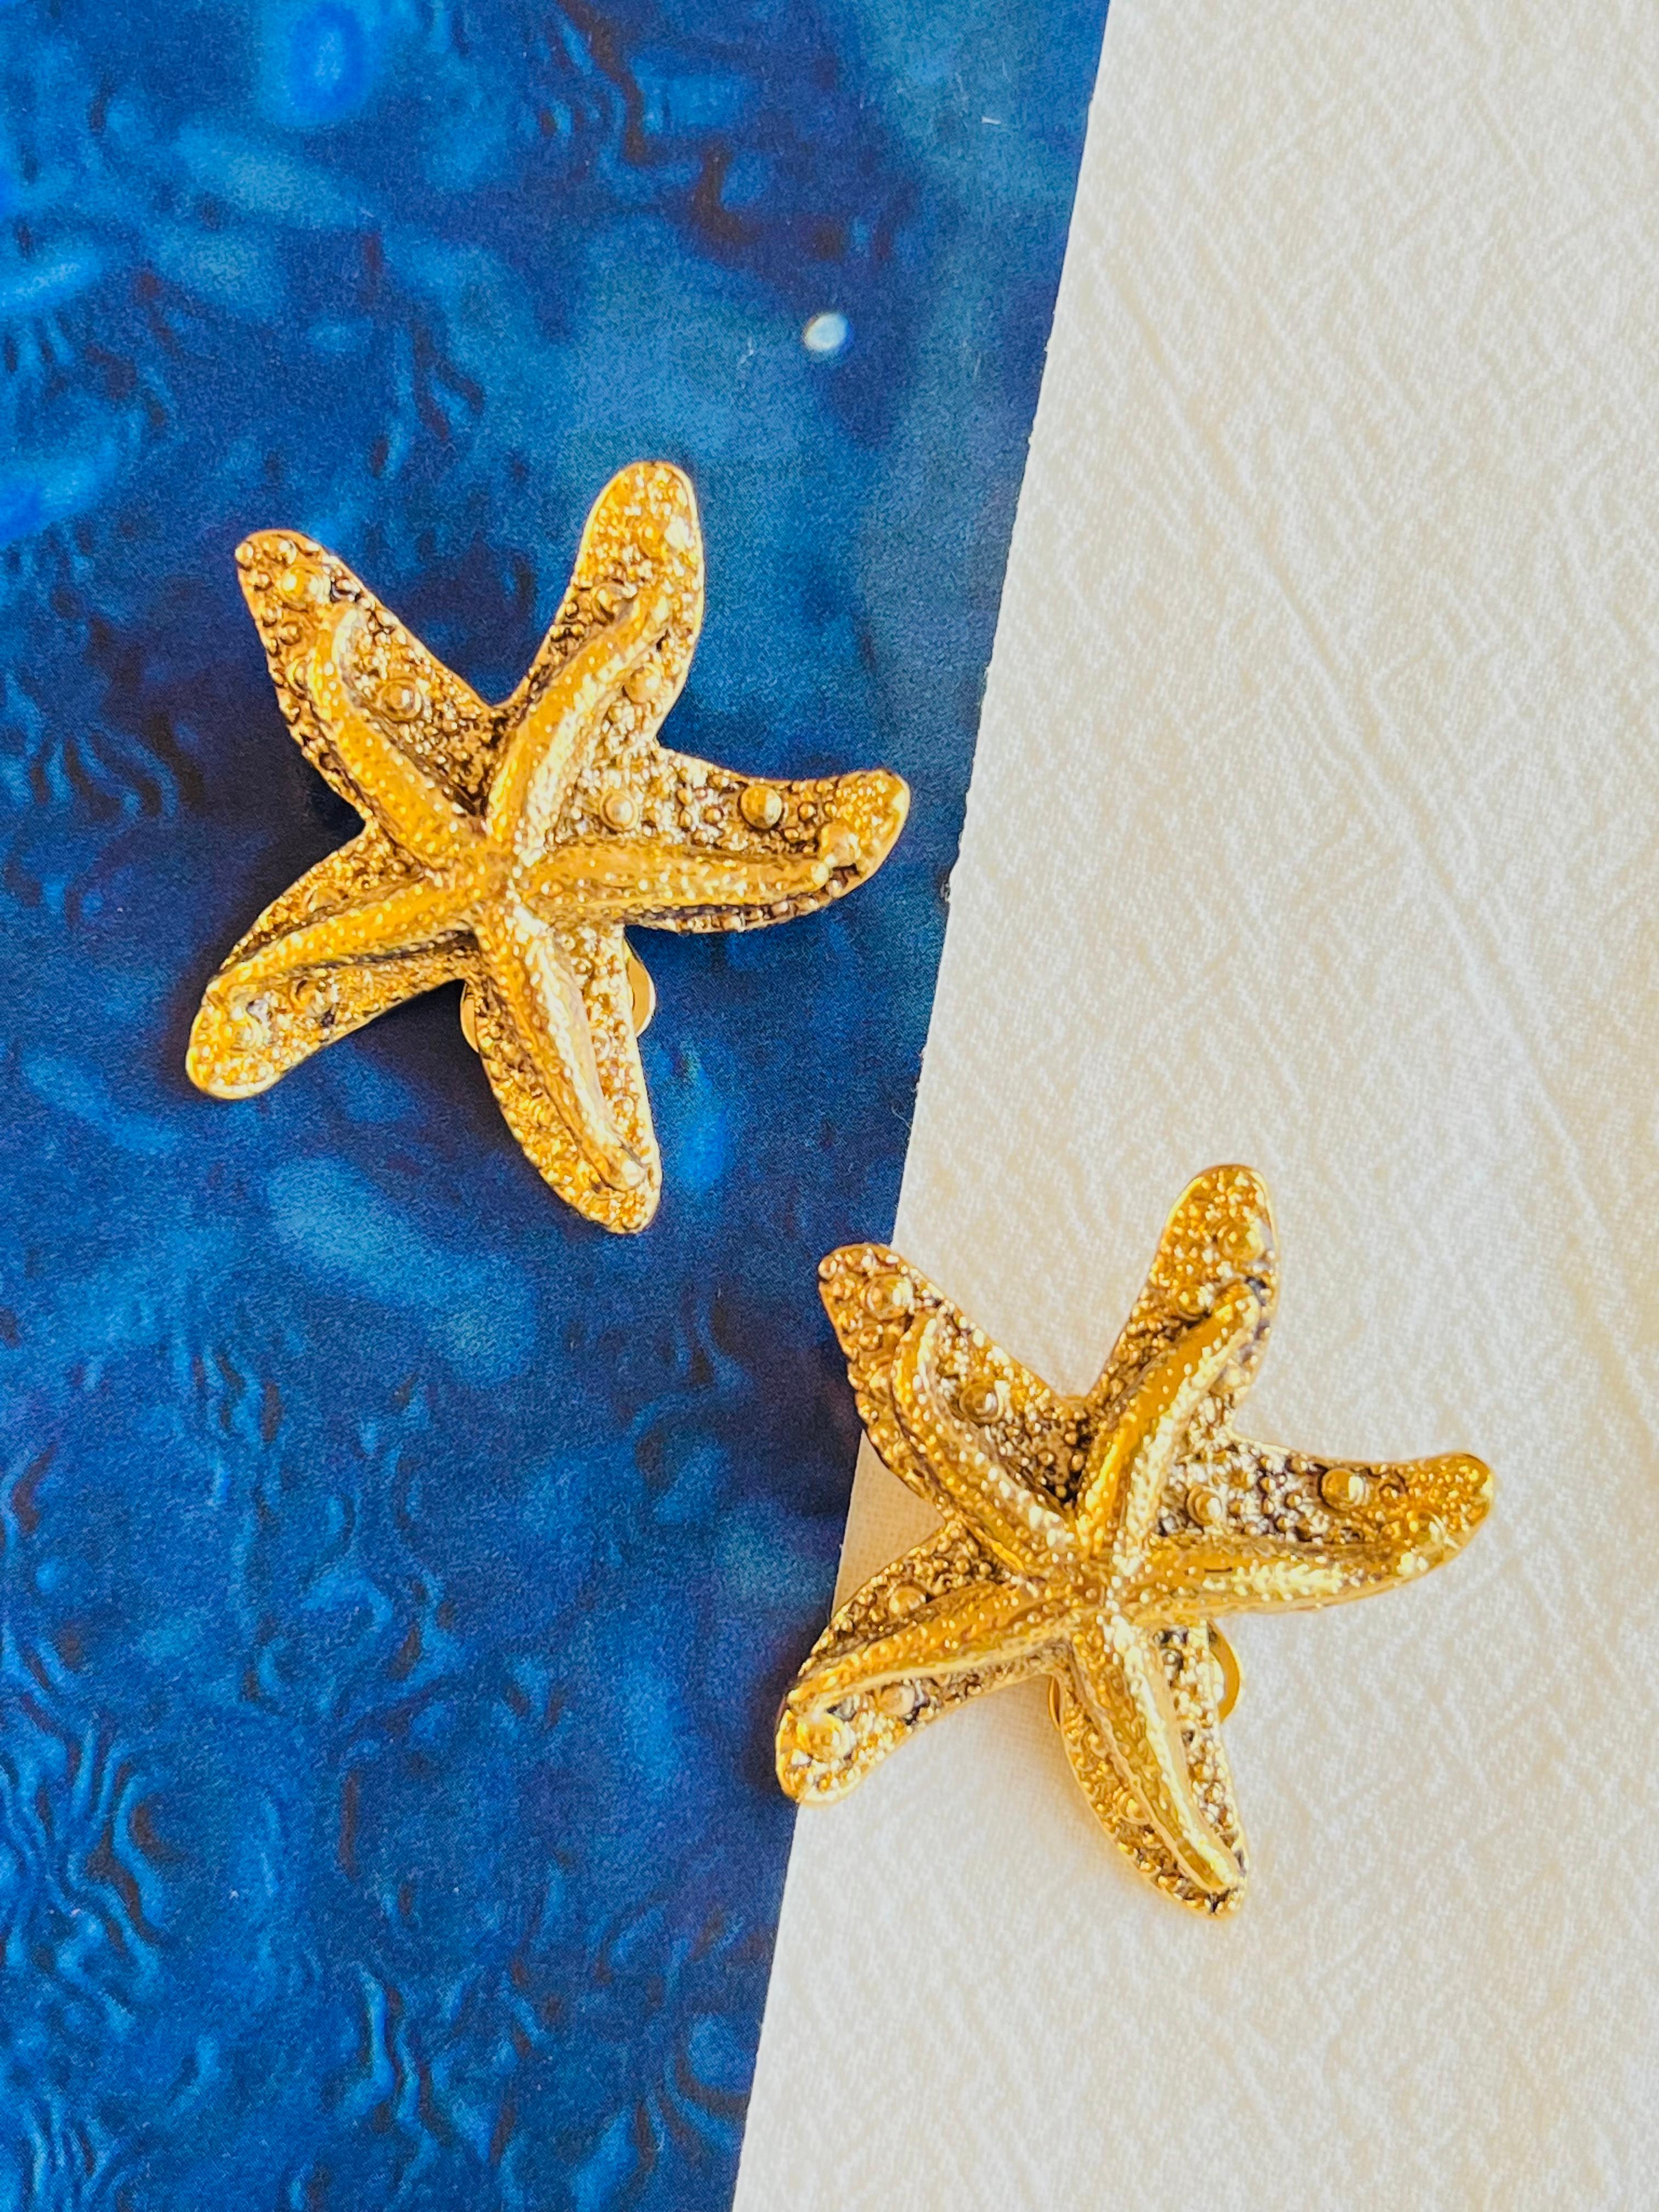 Yves Saint Laurent YSL Vintage Massive Textured Vivid Starfishes Clip Earrings In Excellent Condition For Sale In Wokingham, England